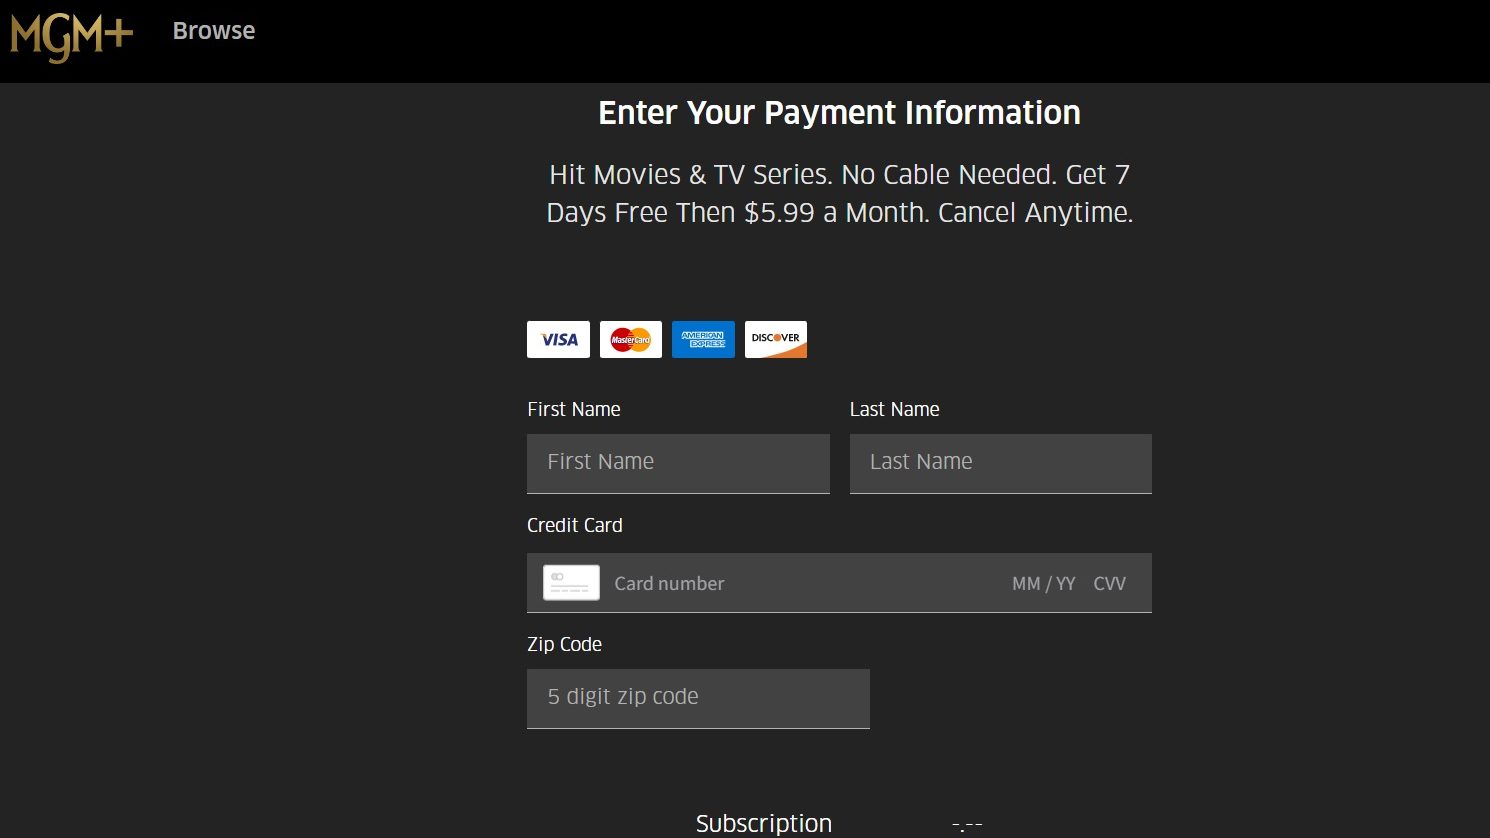 MGM+ screenshot of payment information page, with boxes for name, credit card number and zip code